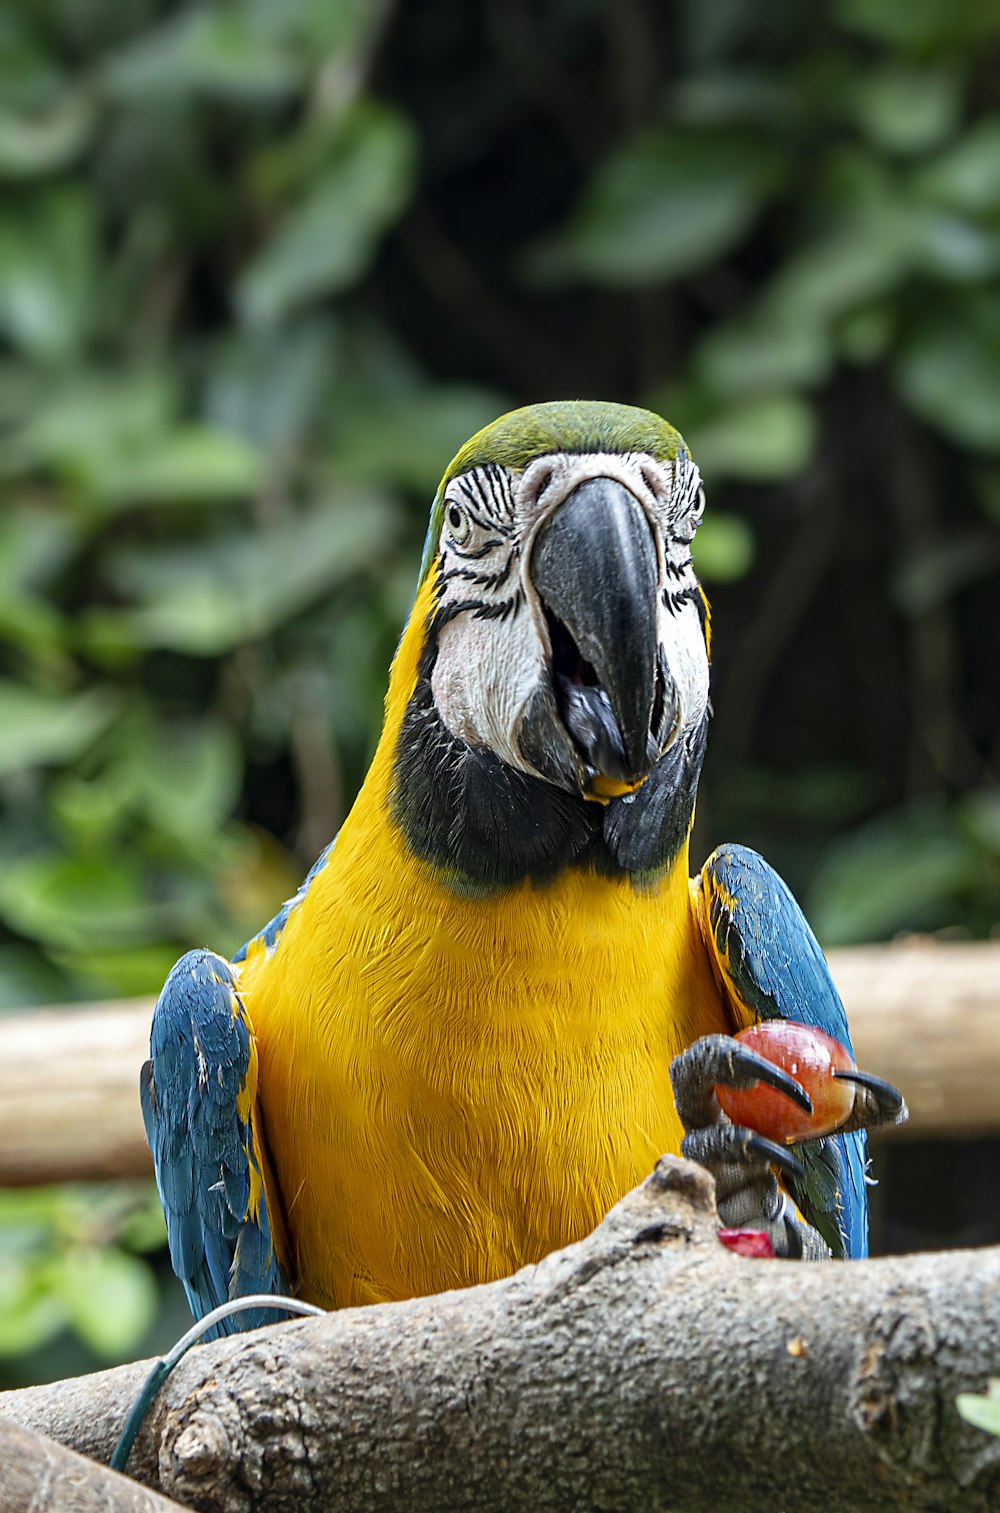 a blue and yellow parrot sitting on top of a tree branch